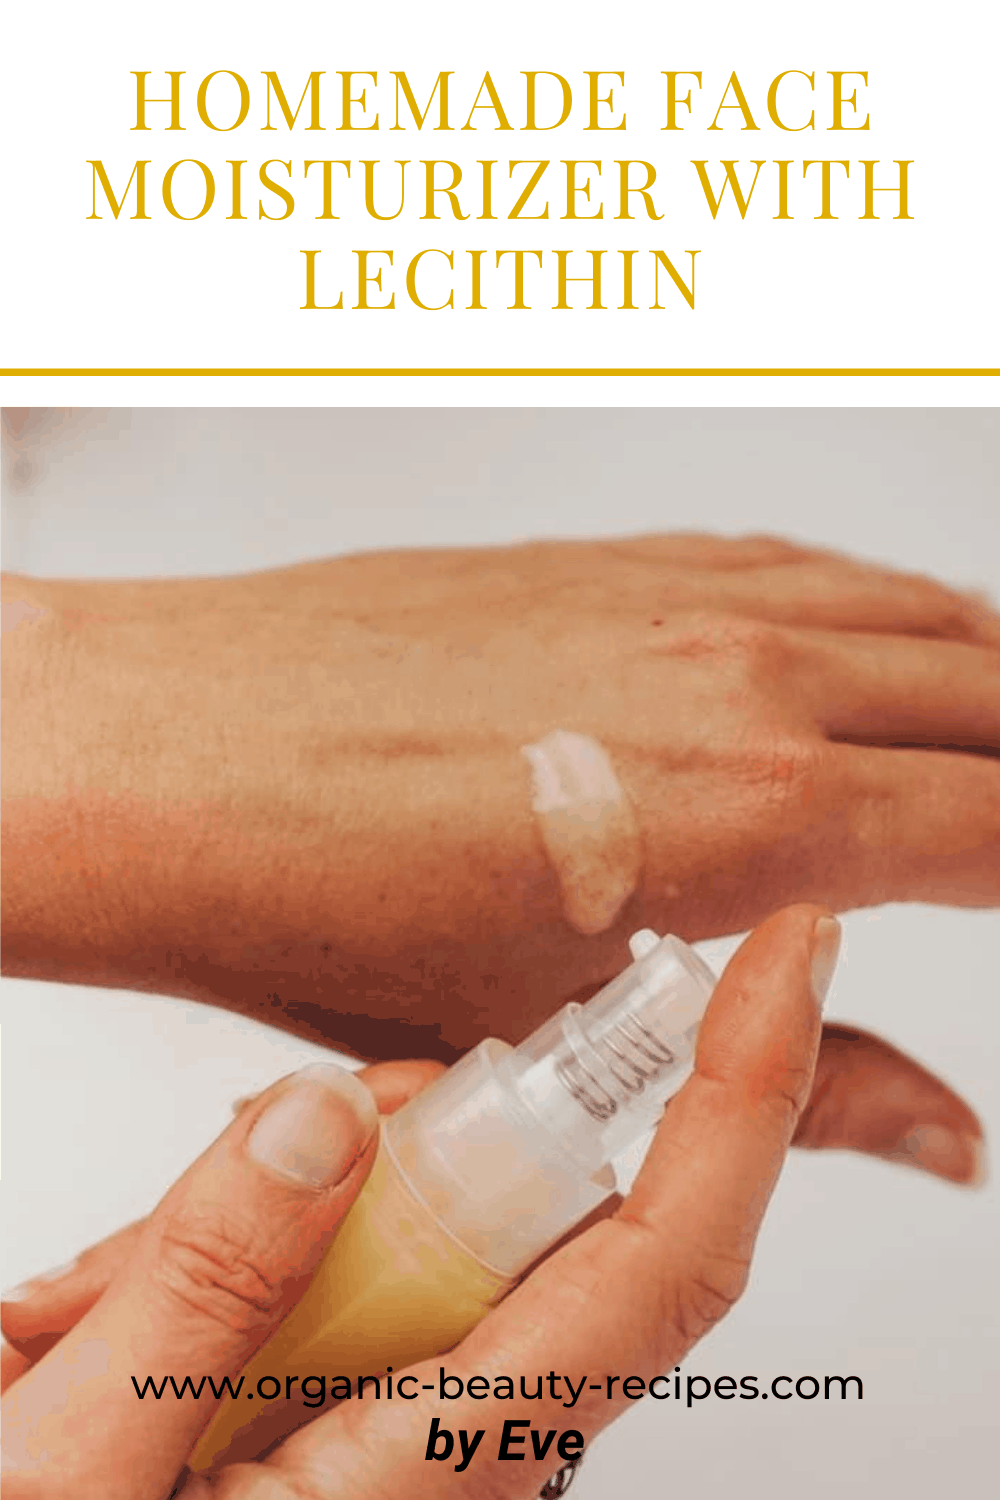 Homemade Face Moisturizer With Lecithin